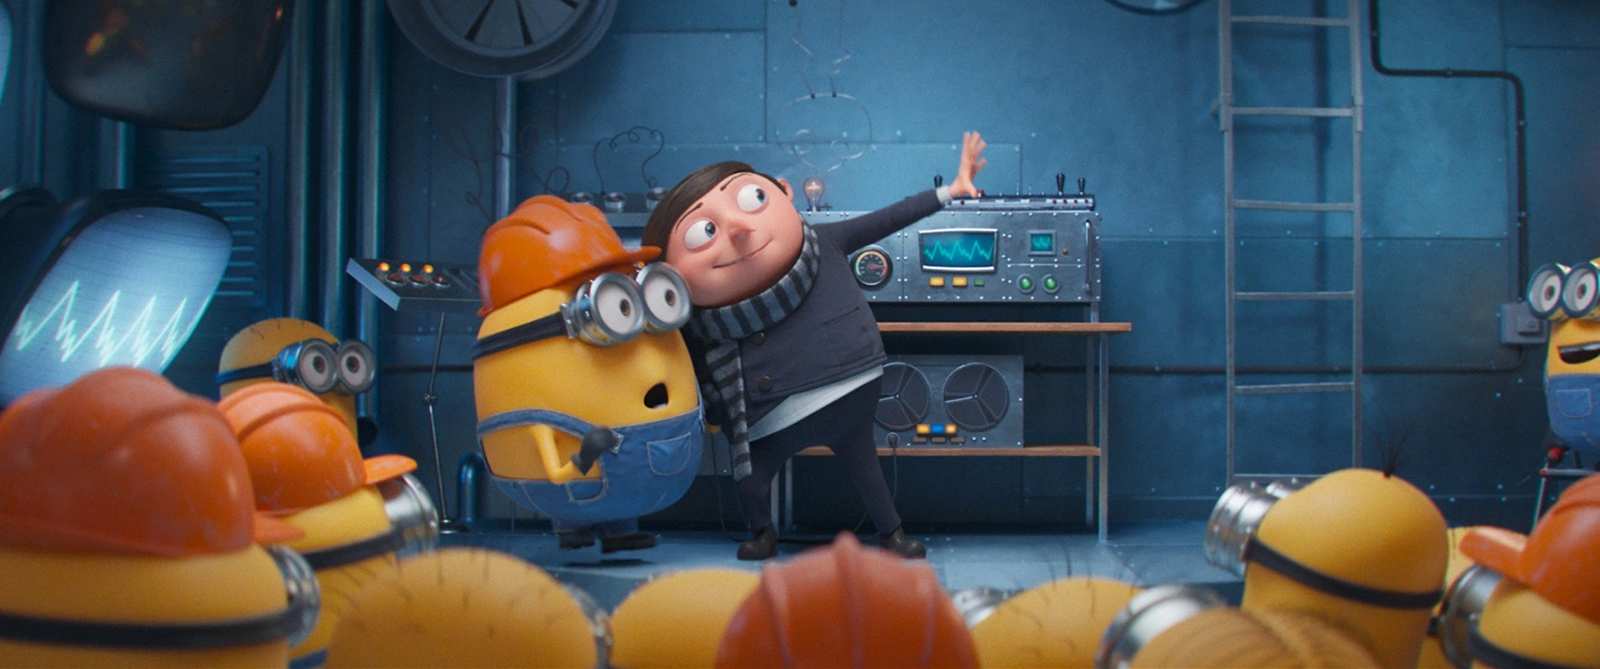 ‘Minions: The Rise of Gru’ given alternate ending by Chinese censors, report says